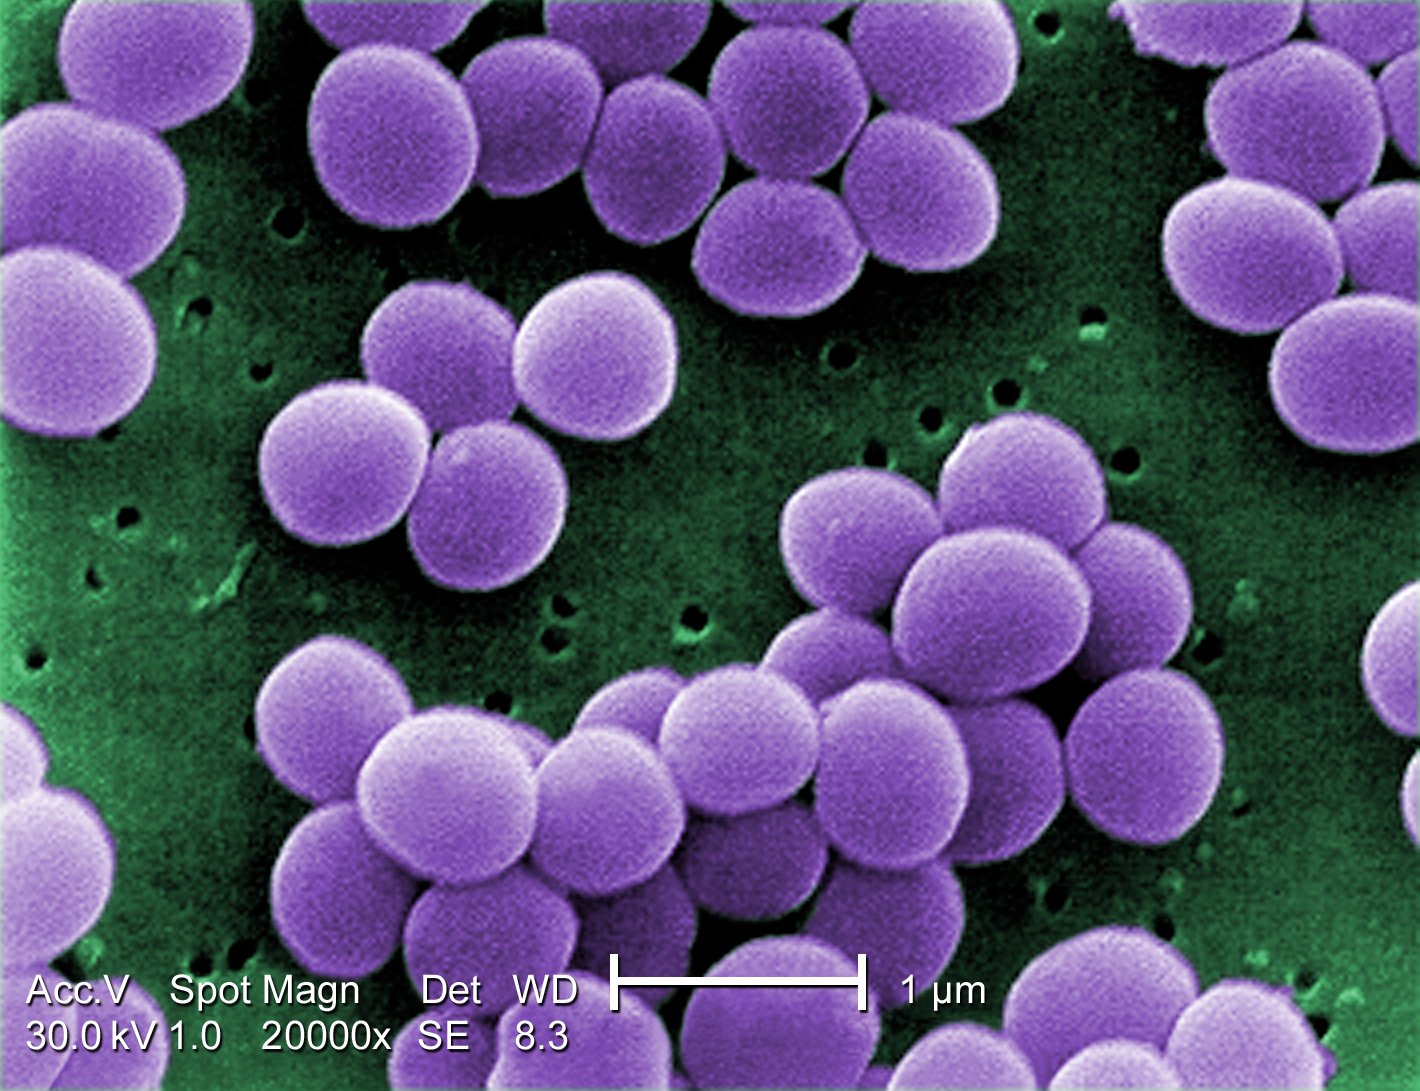 Staphylococcus, a common bacteria, can be used to attack and kill dangerous bacteria, including 'superbugs' which have become progressively resistant to antibiotics. – Pic courtesy of Wikipedia, February 29, 2016.